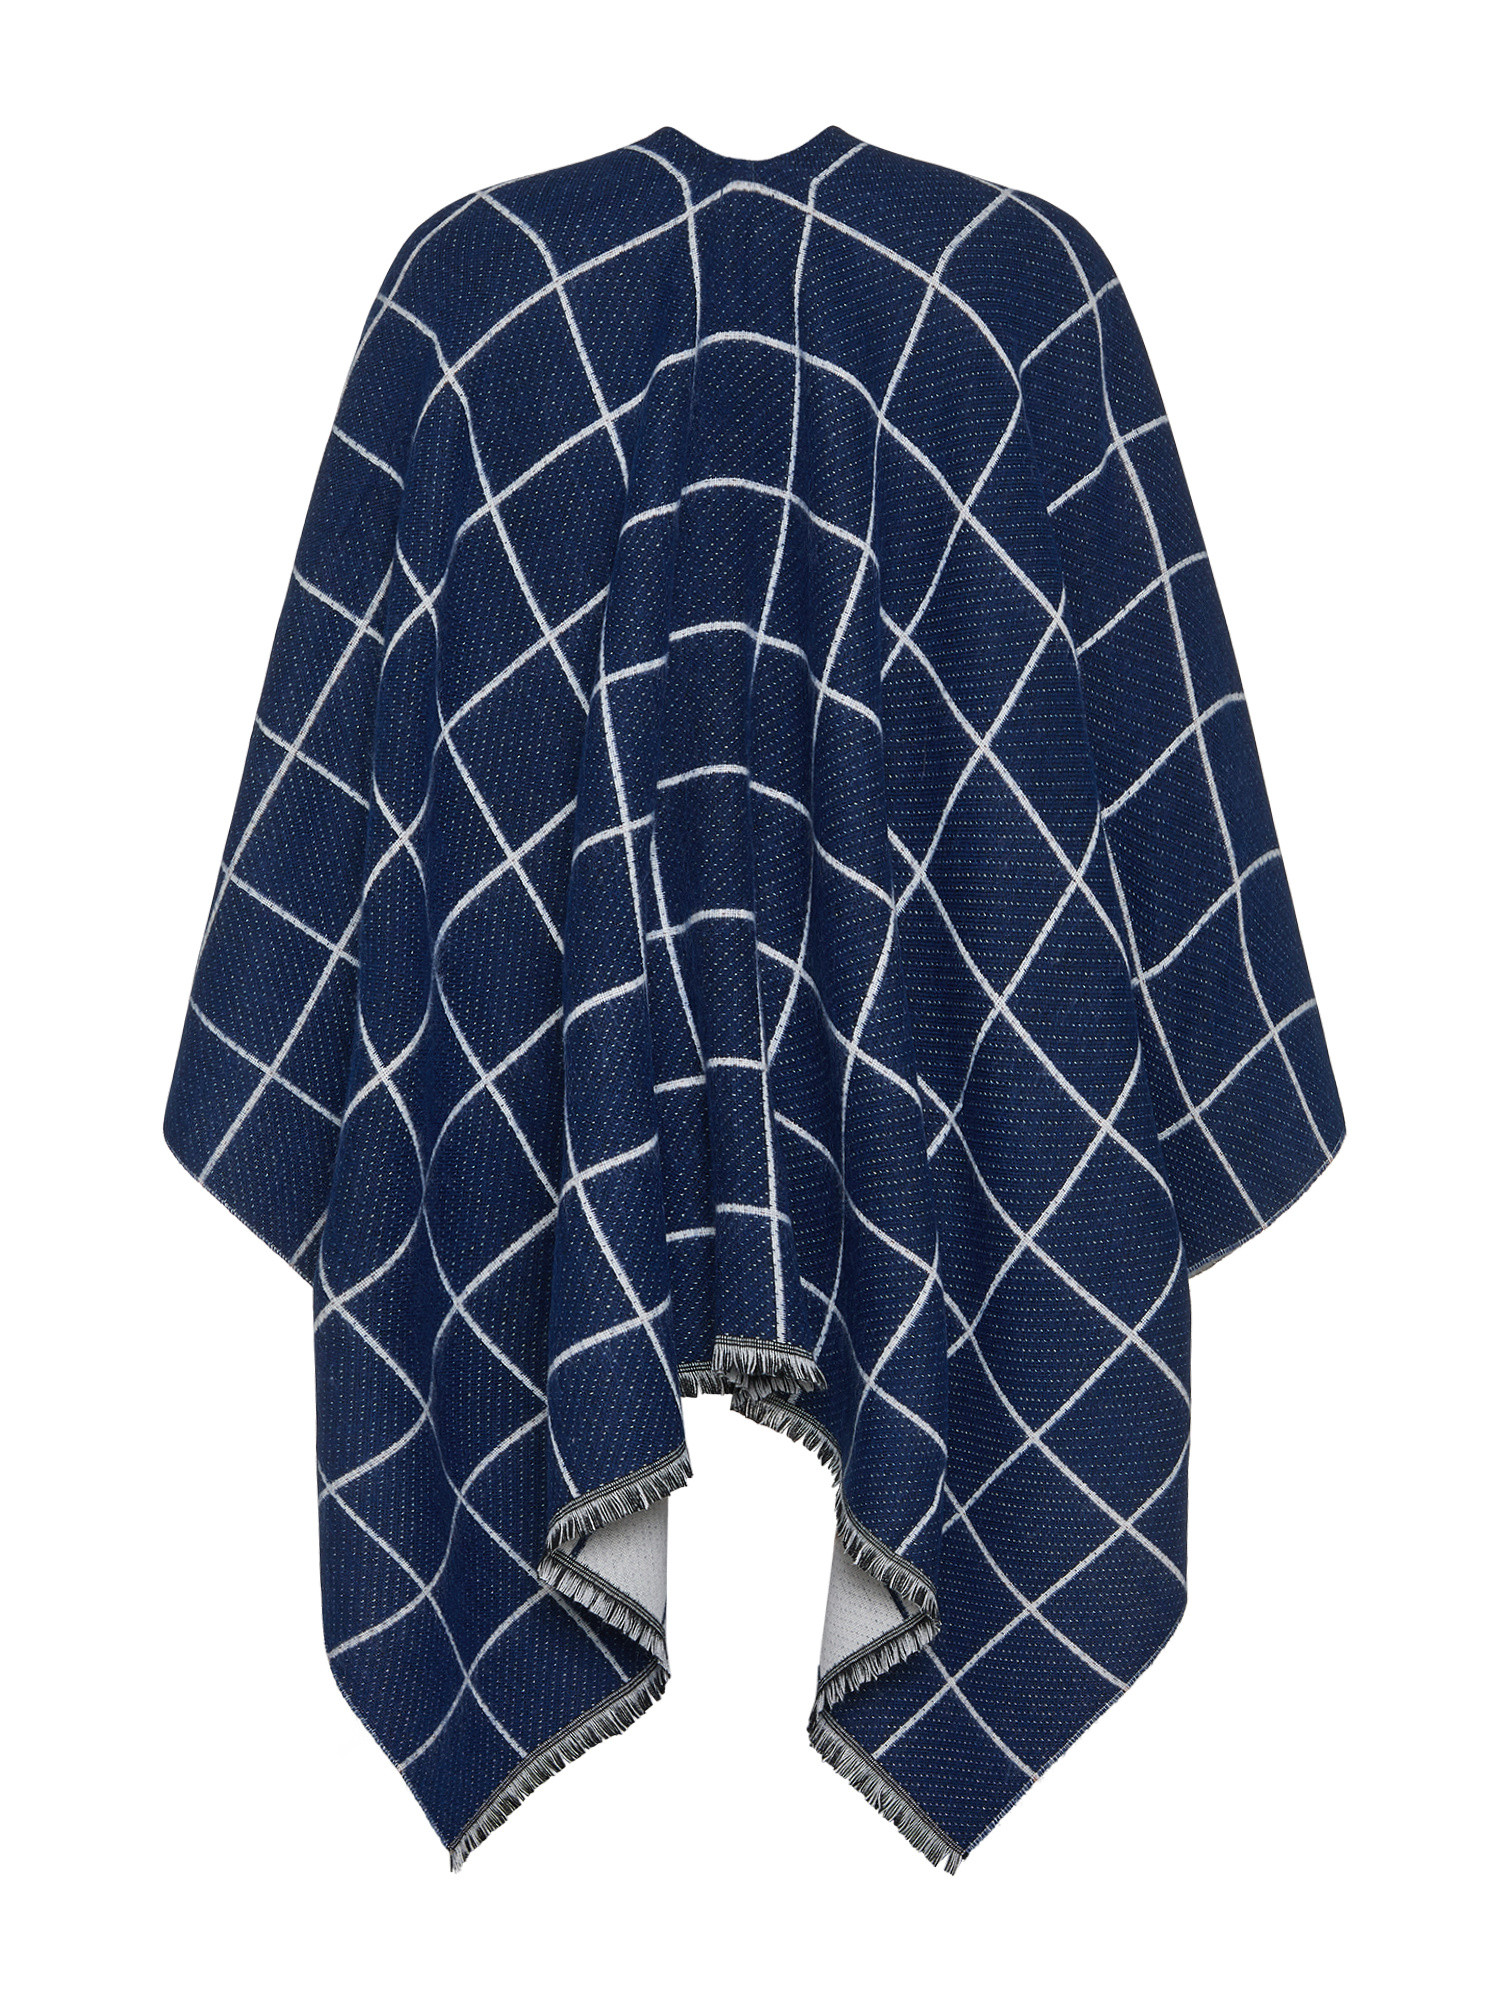 Koan - Checked cape, Blue, large image number 1